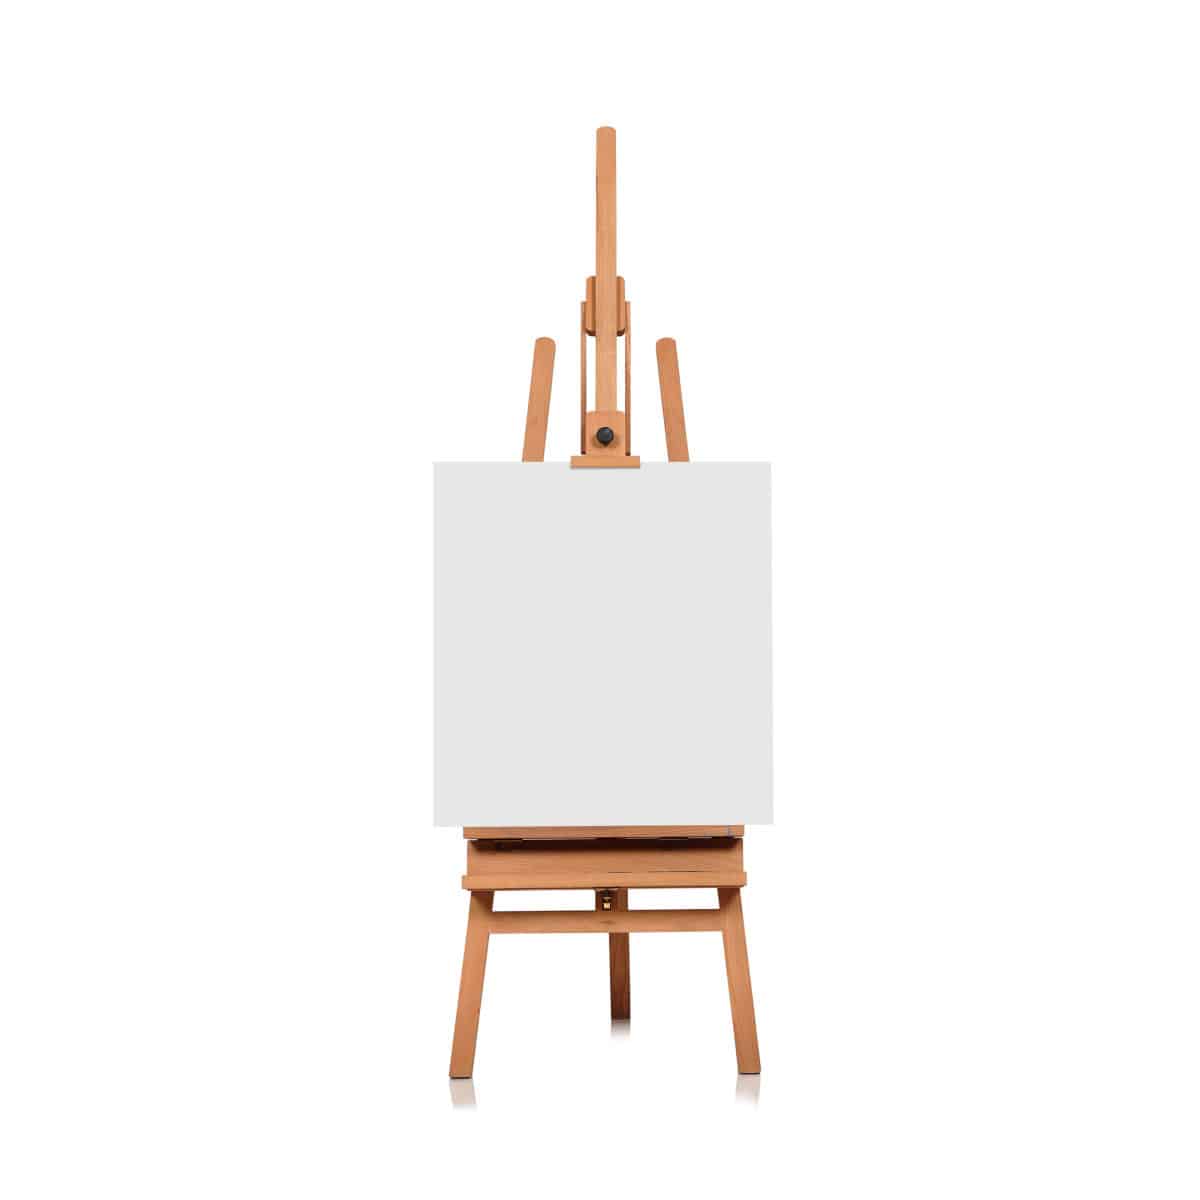 Realistic paint desk with blank white canvas. Wooden easel and a